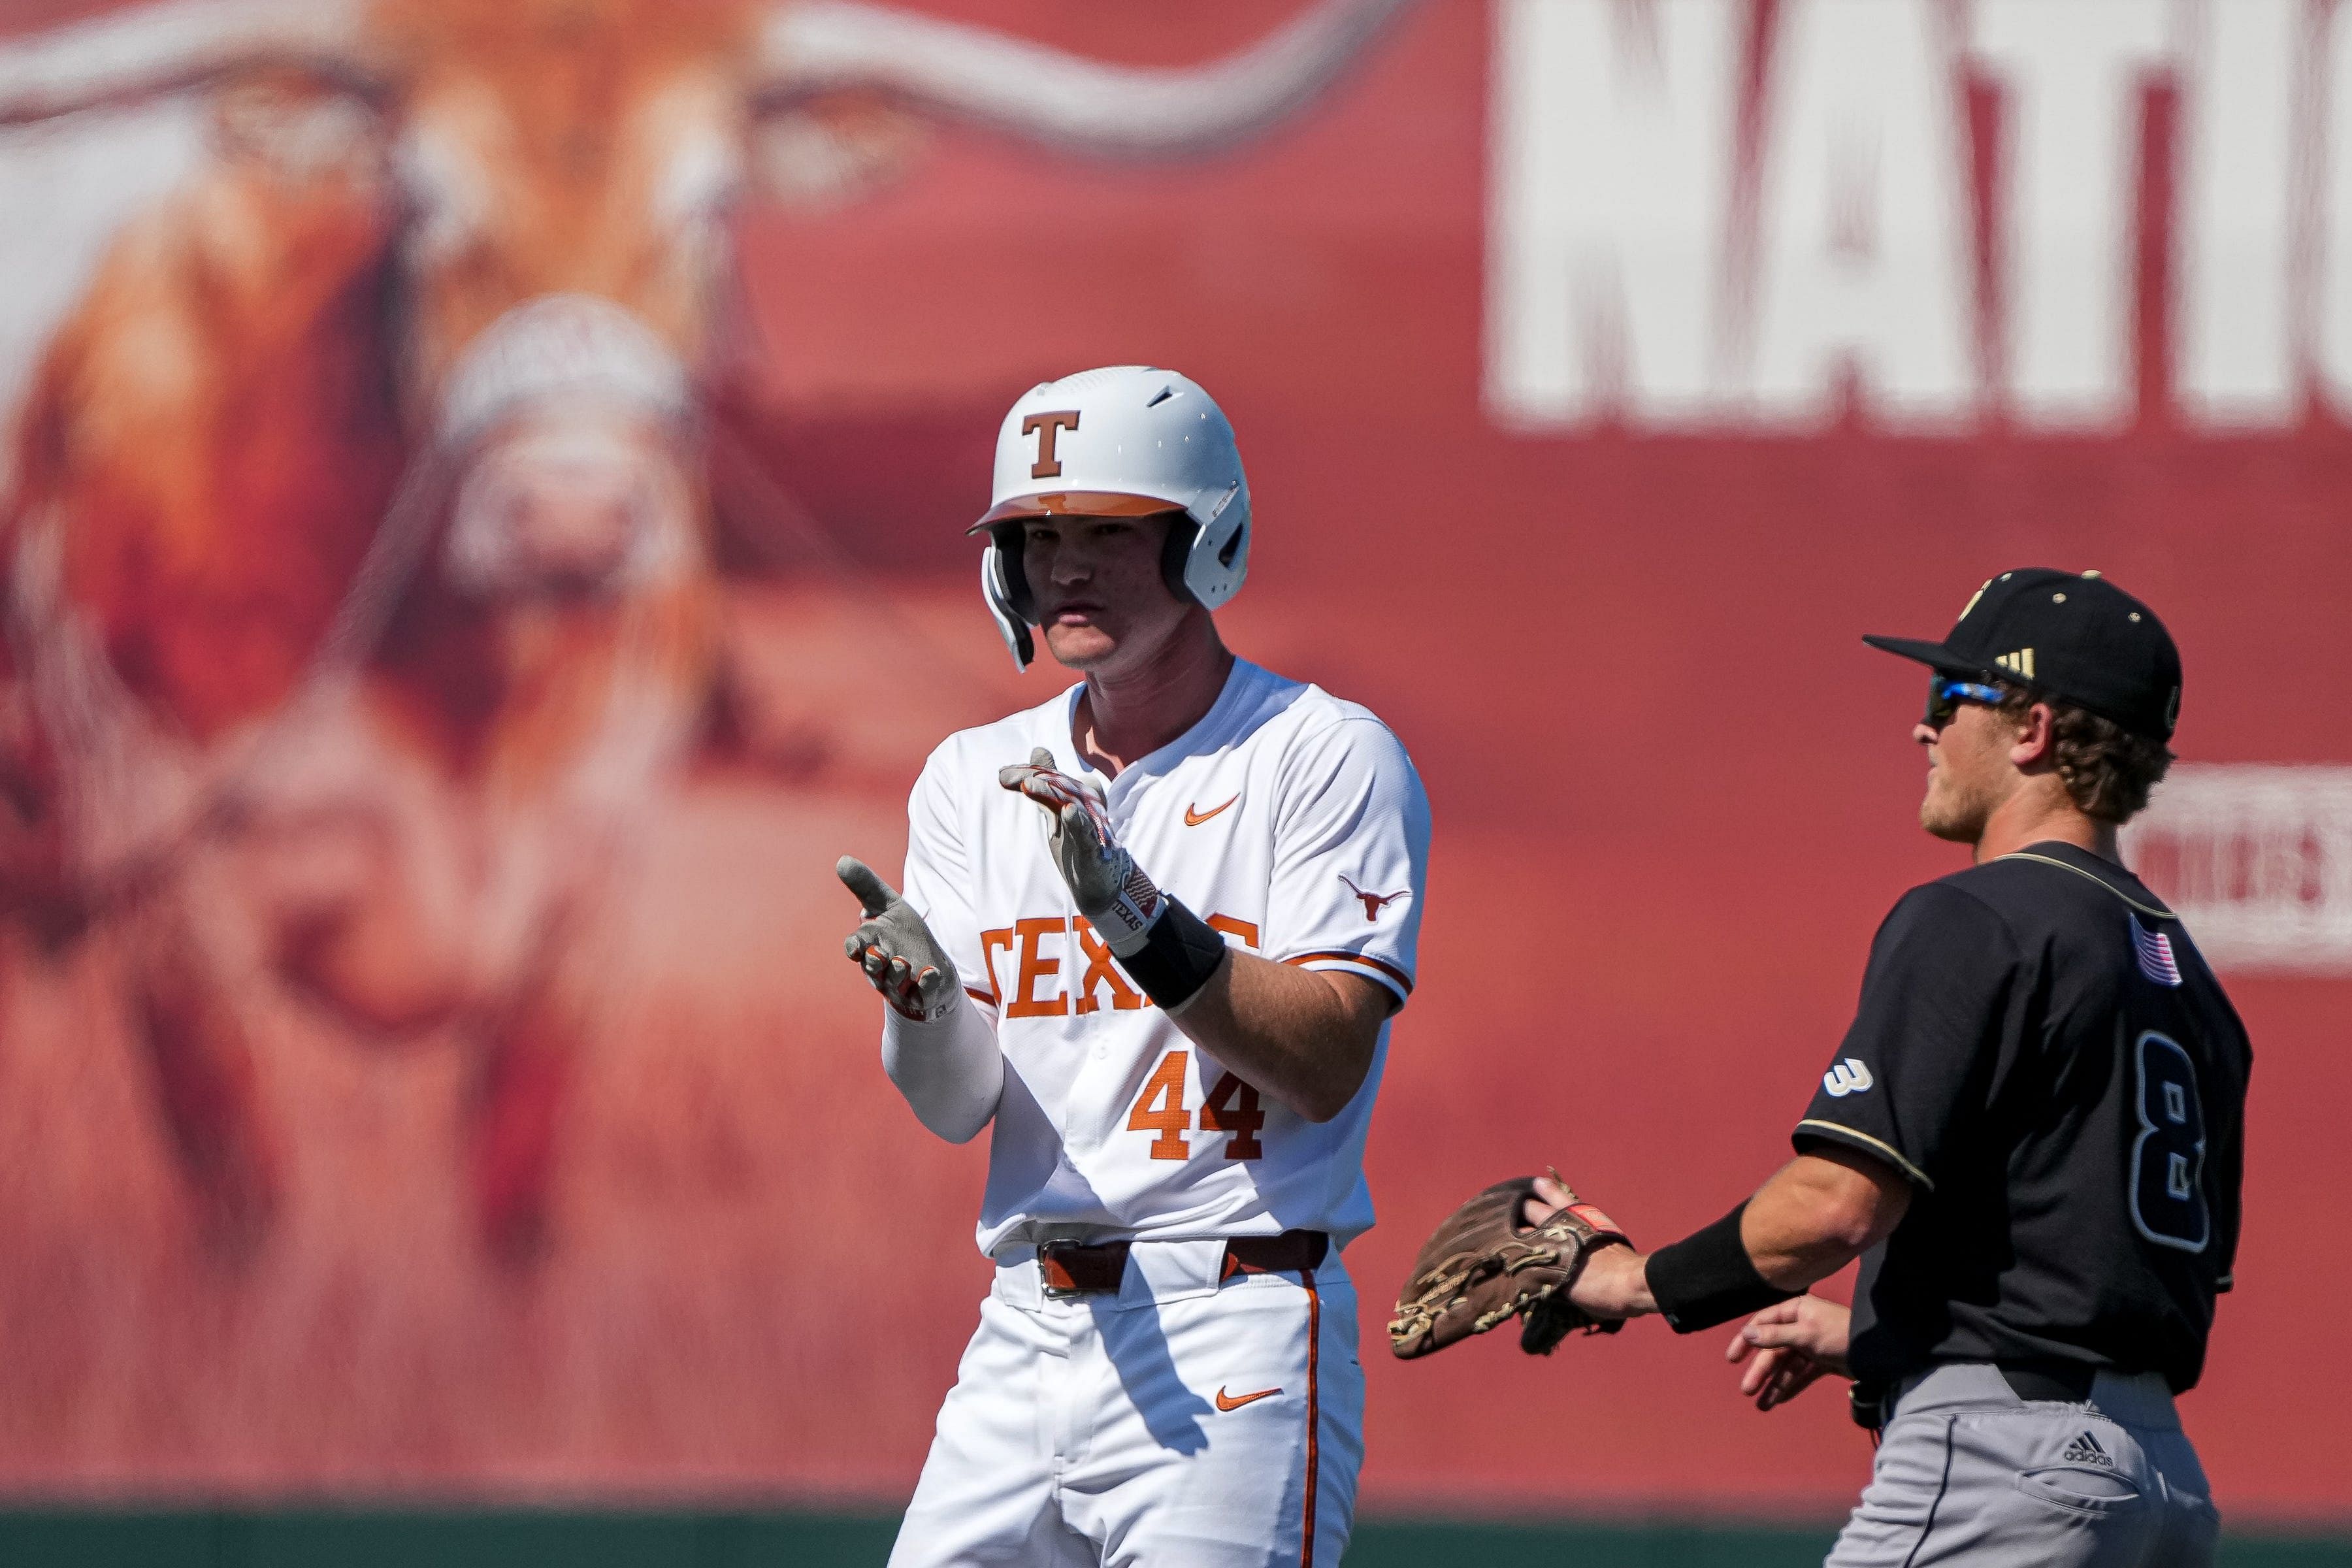 Max Belyeu has recorded 17 HRs and 45 RBIs this season for Texas.